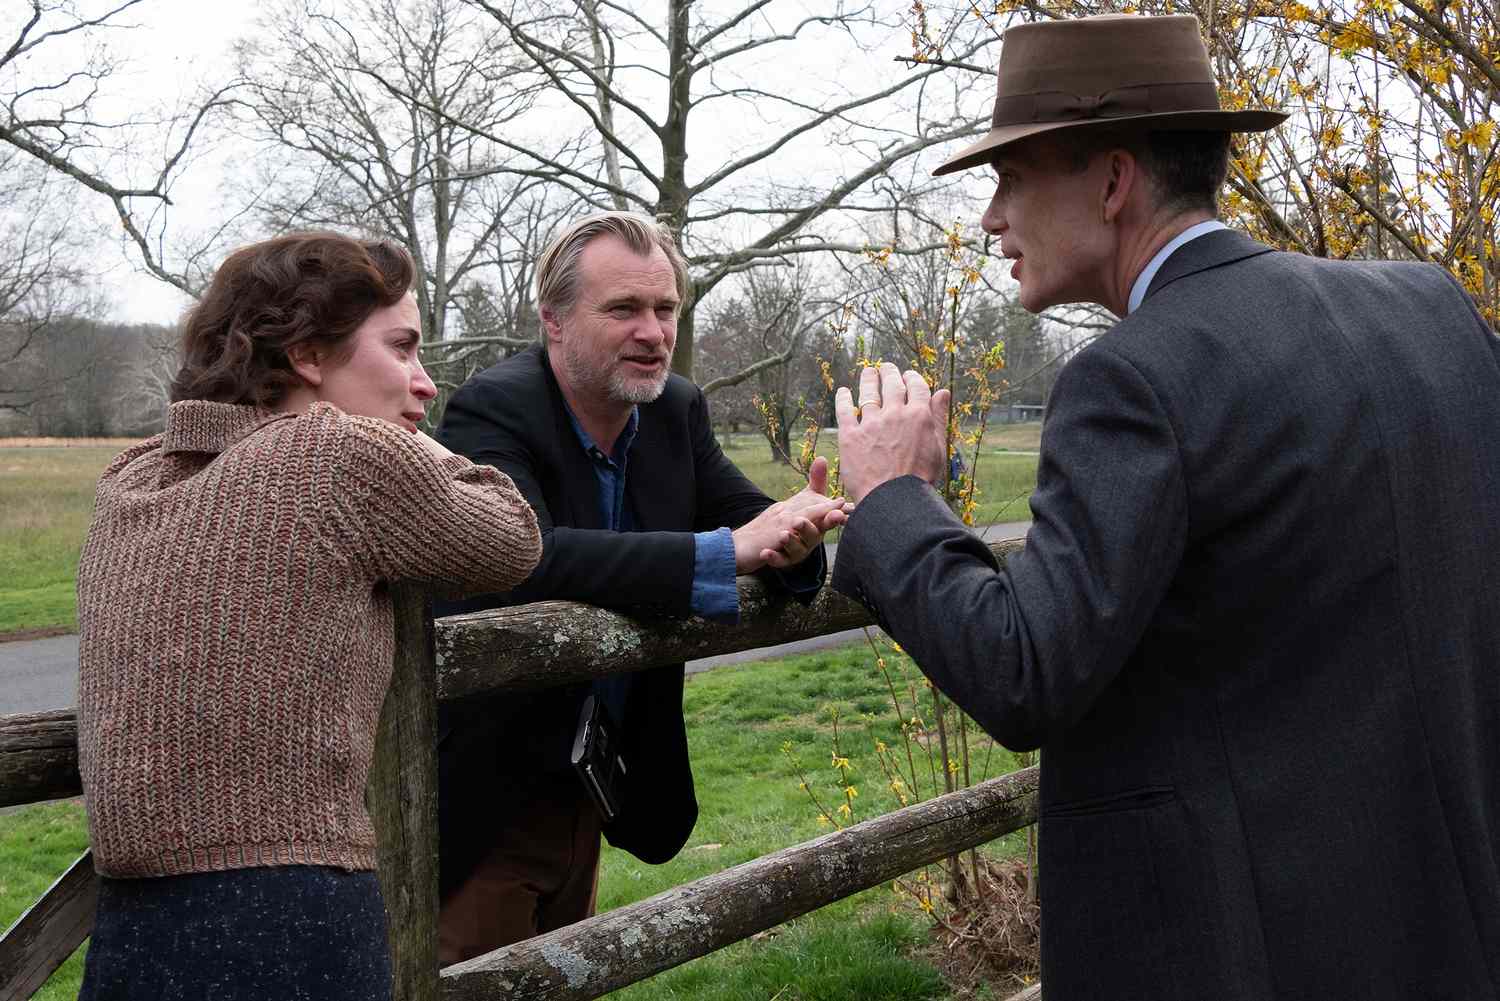 L to R: Emily Blunt (as Kitty Oppenheimer) with writer, director, and producer Christopher Nolan and Cillian Murphy (as J. Robert Oppenheimer) on the set of OPPENHEIMER.